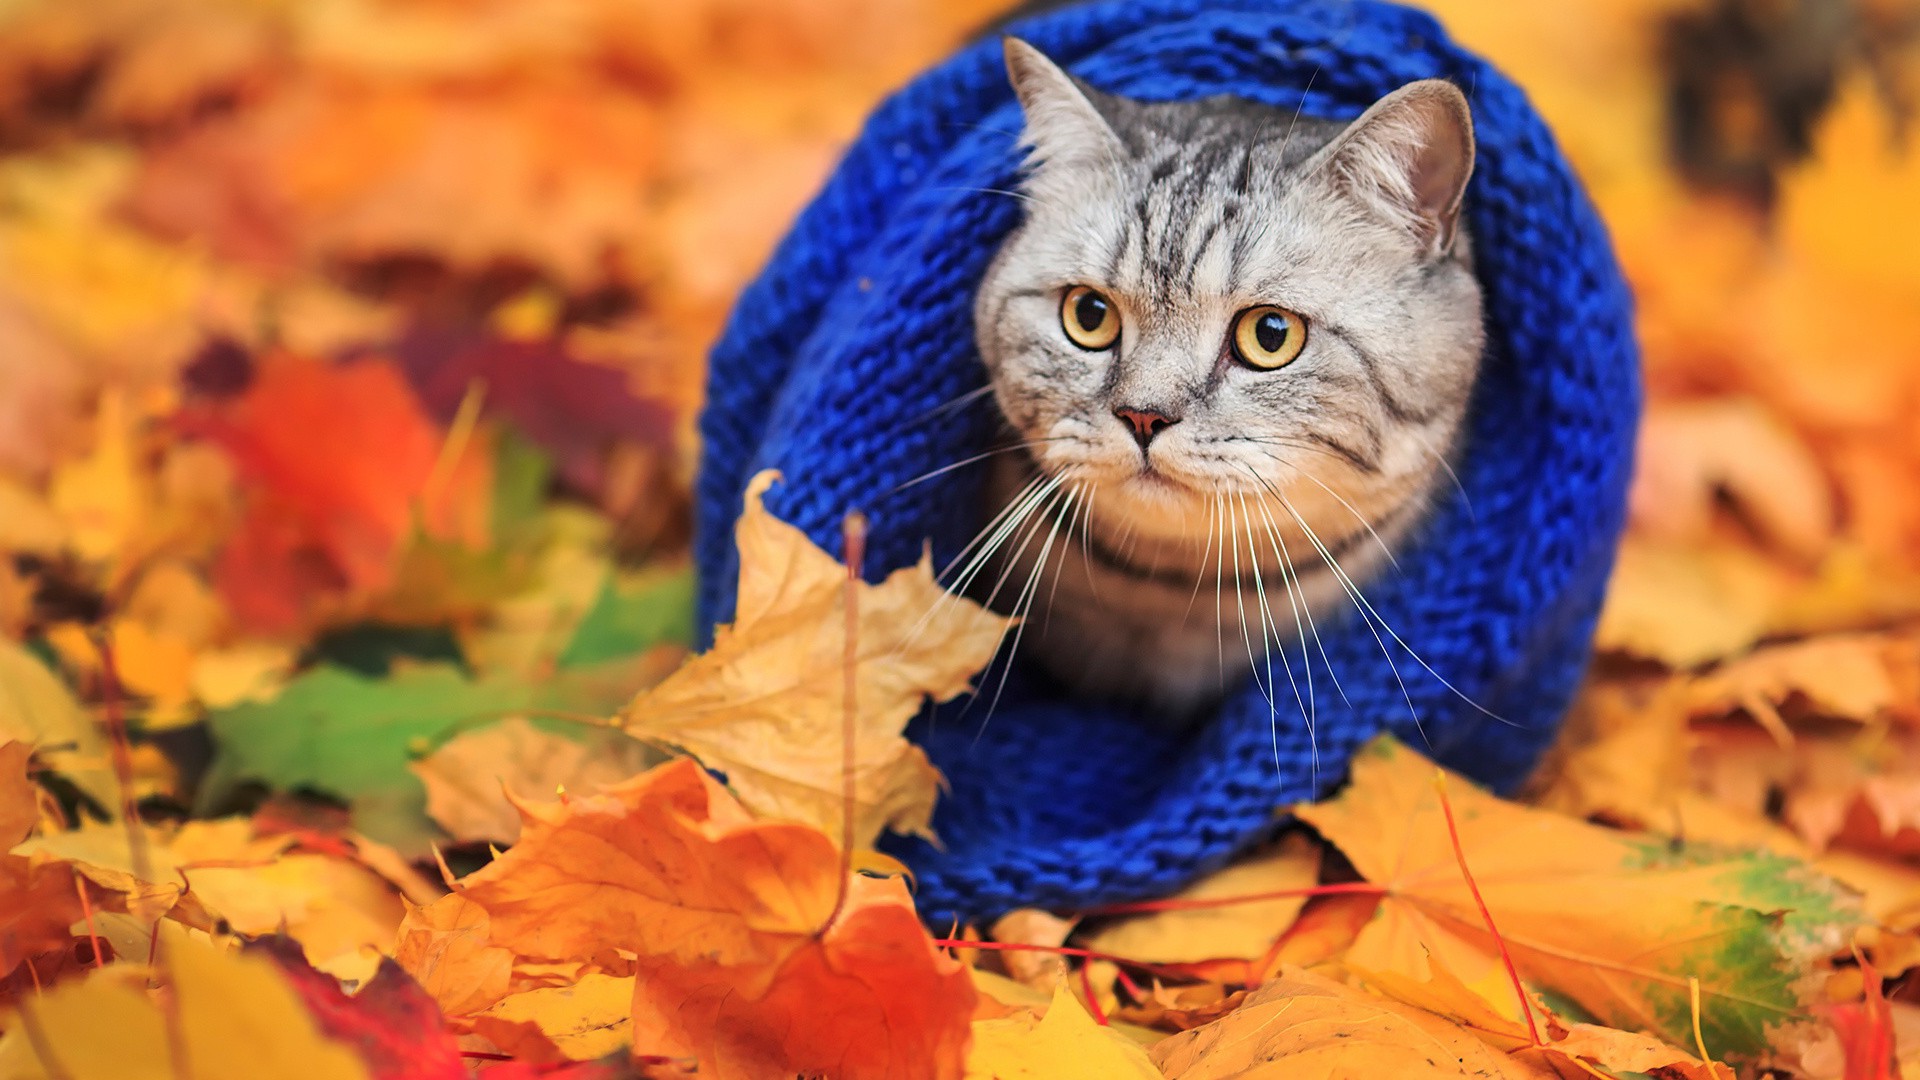 animals, Cat, Woolly Hat, Leaves, Fall Wallpaper